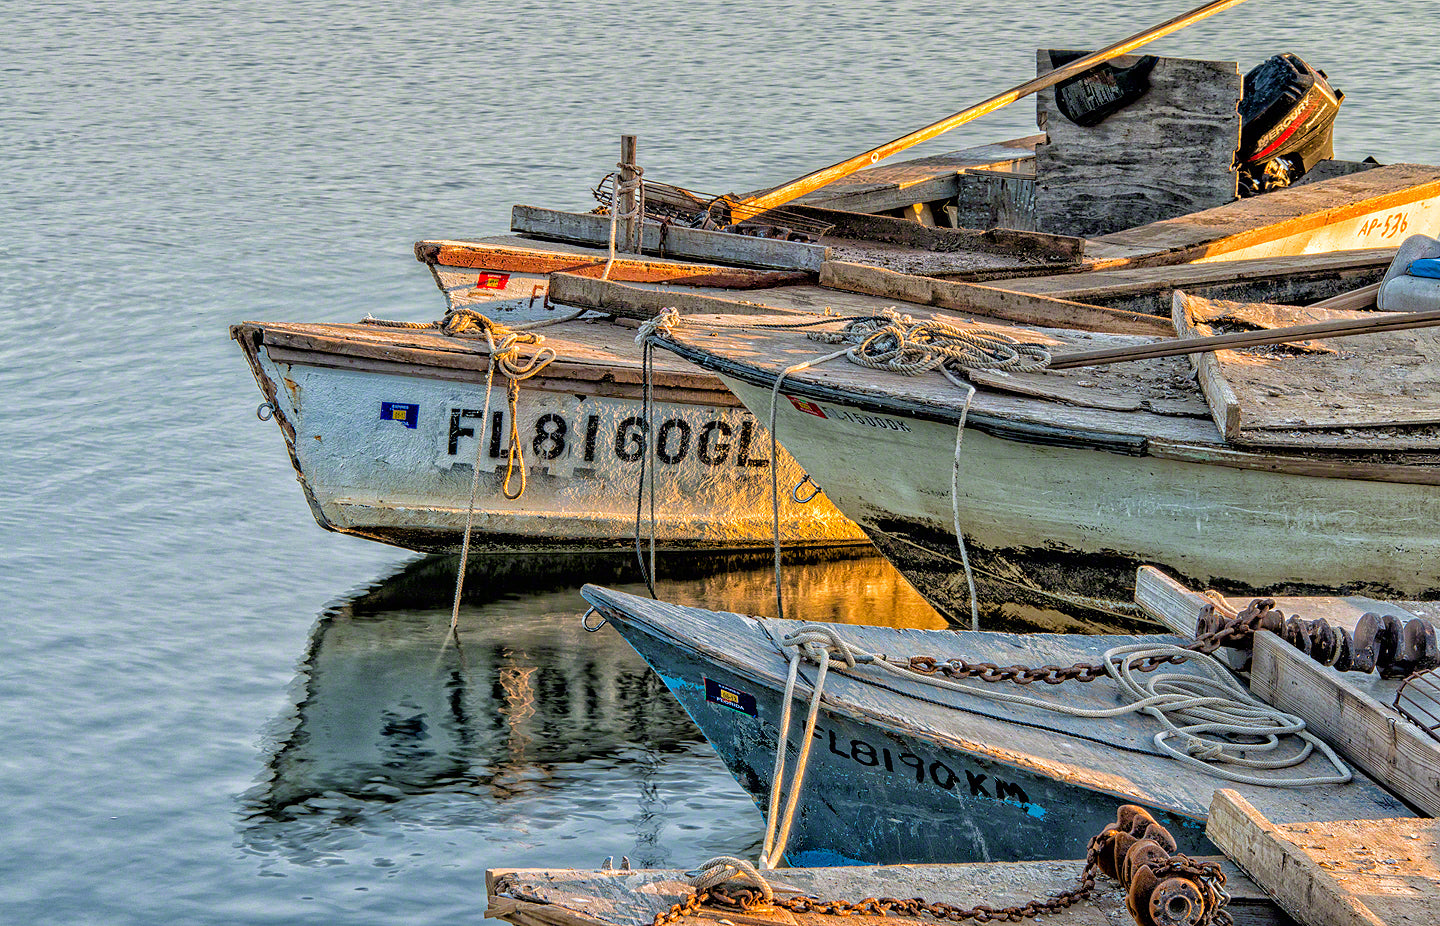 A photo of a group of oyster boats